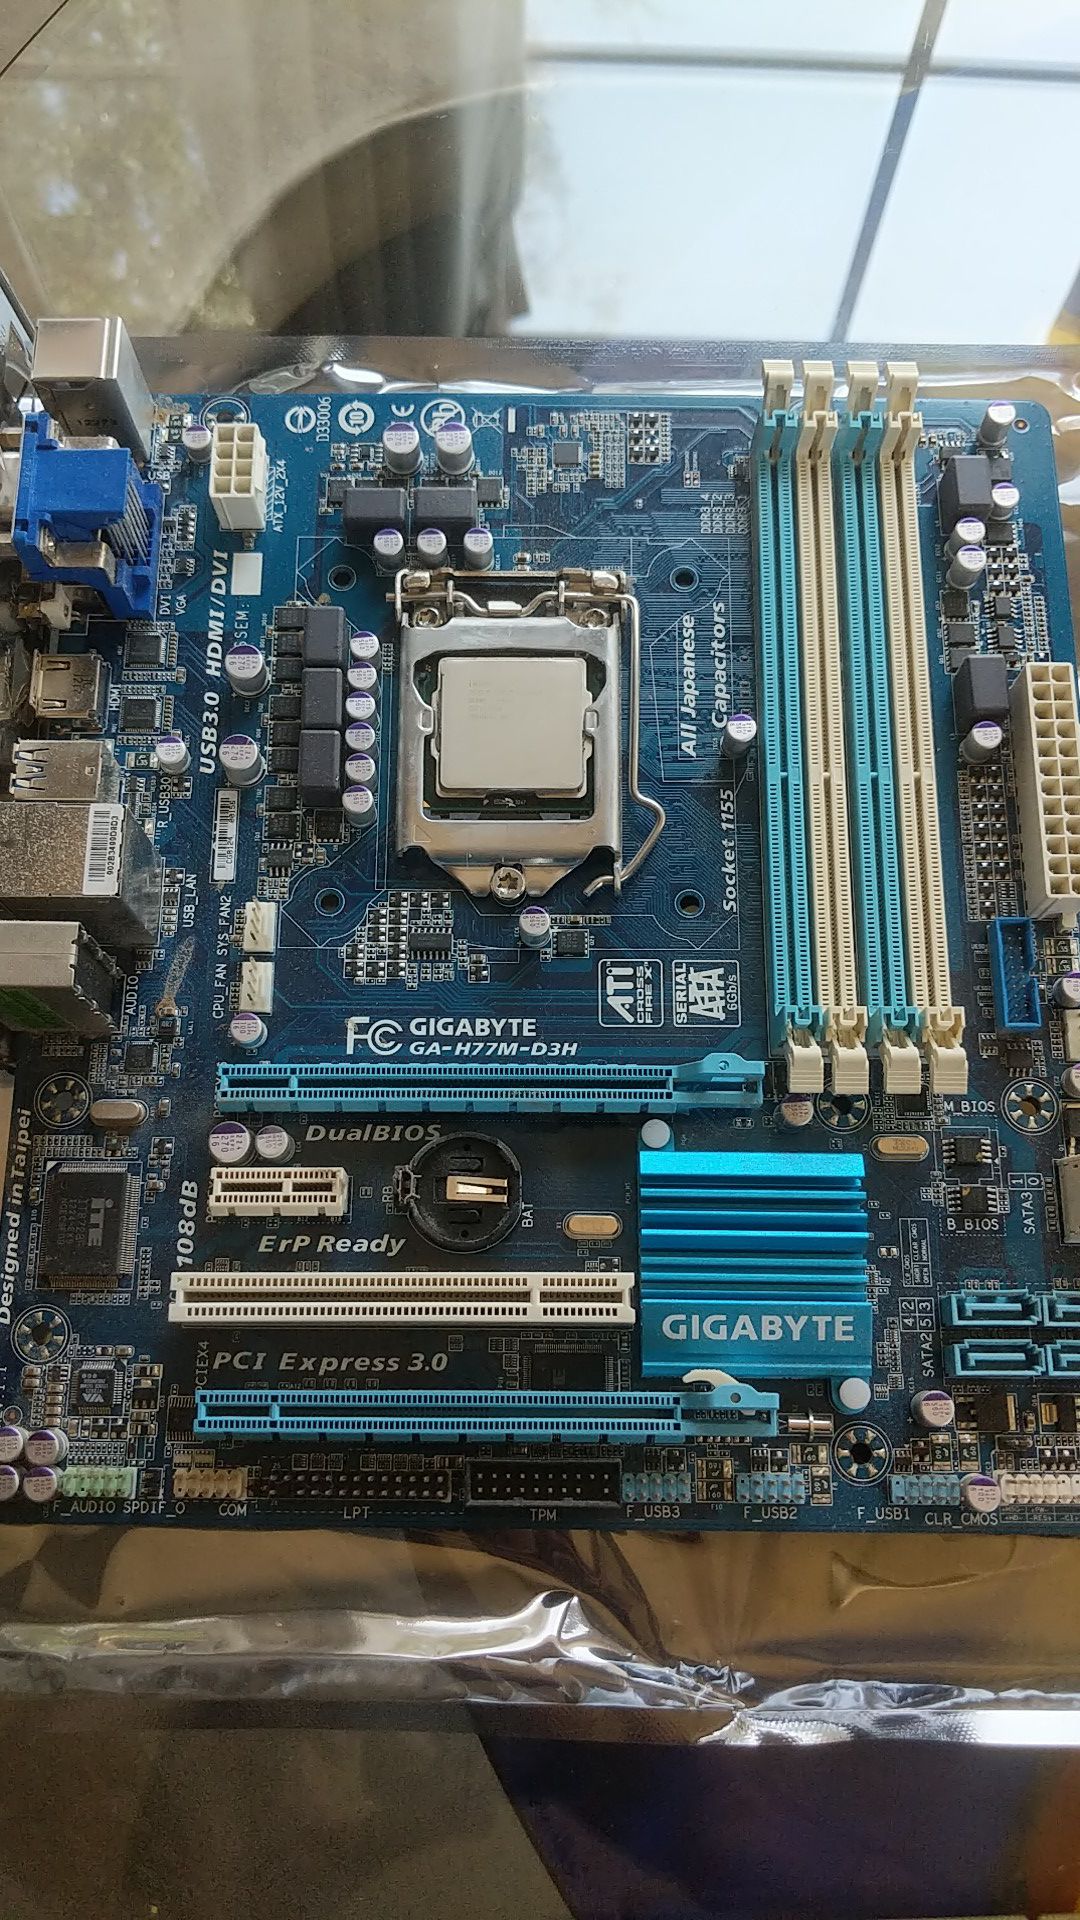 Computer Parts - Motherboard, i7 2600, DDR3 RAM, Graphic Card - Rx460